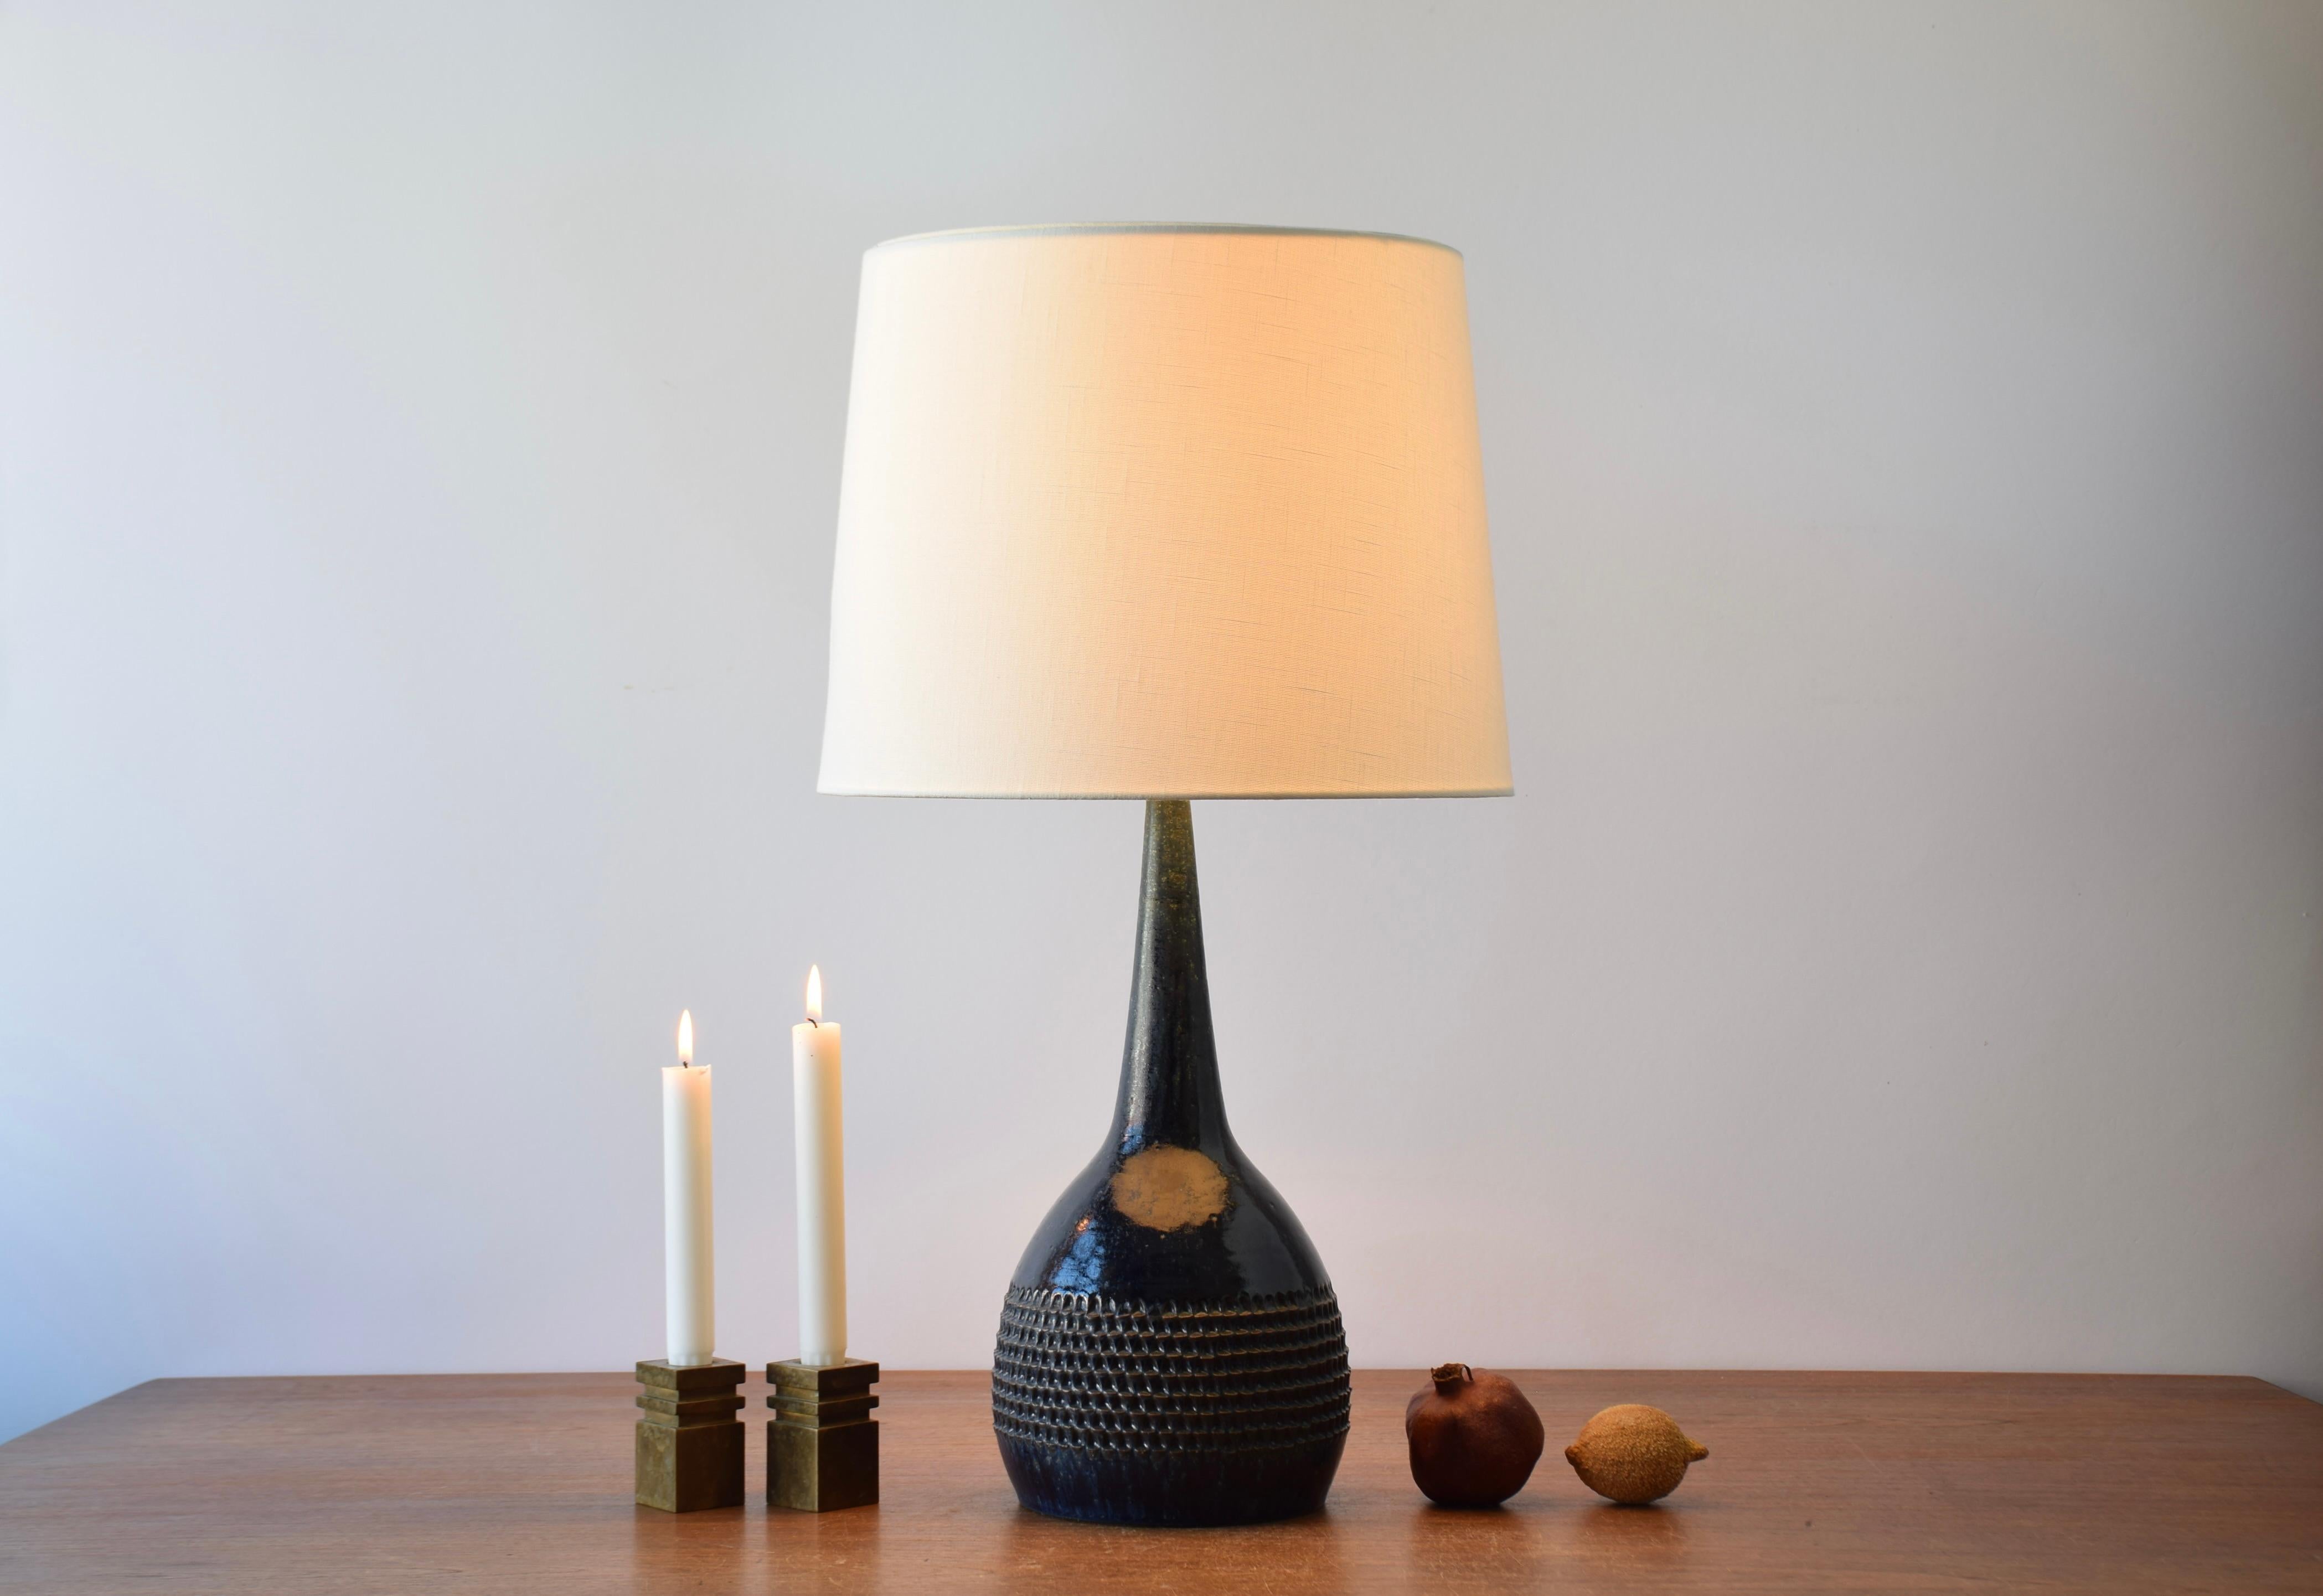 Tall and rare sculptural midcentury Danish ceramic table lamp designed by Per Linnemann-Schmidt for Palshus. Made circa 1960s. The shape of this Palshus lamp as well as the glaze color is very rare and unusual for Palshus.
The lamp is made from